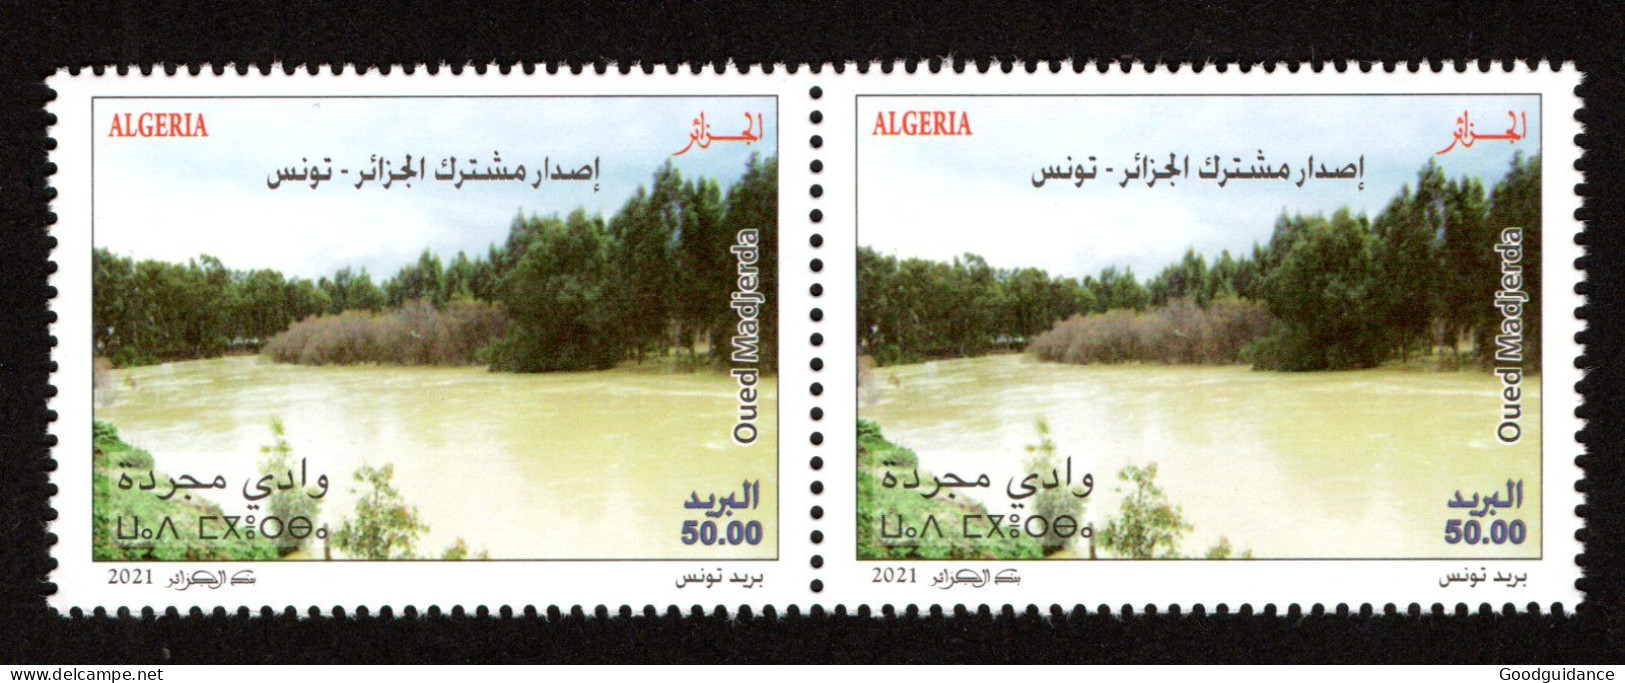 2021 - Algeria - Joint Postage Stamp Tunisia-Algeria : Oued Madjerda - River - Pair Of Stamps - Complete Set 1v.MNH** - Joint Issues